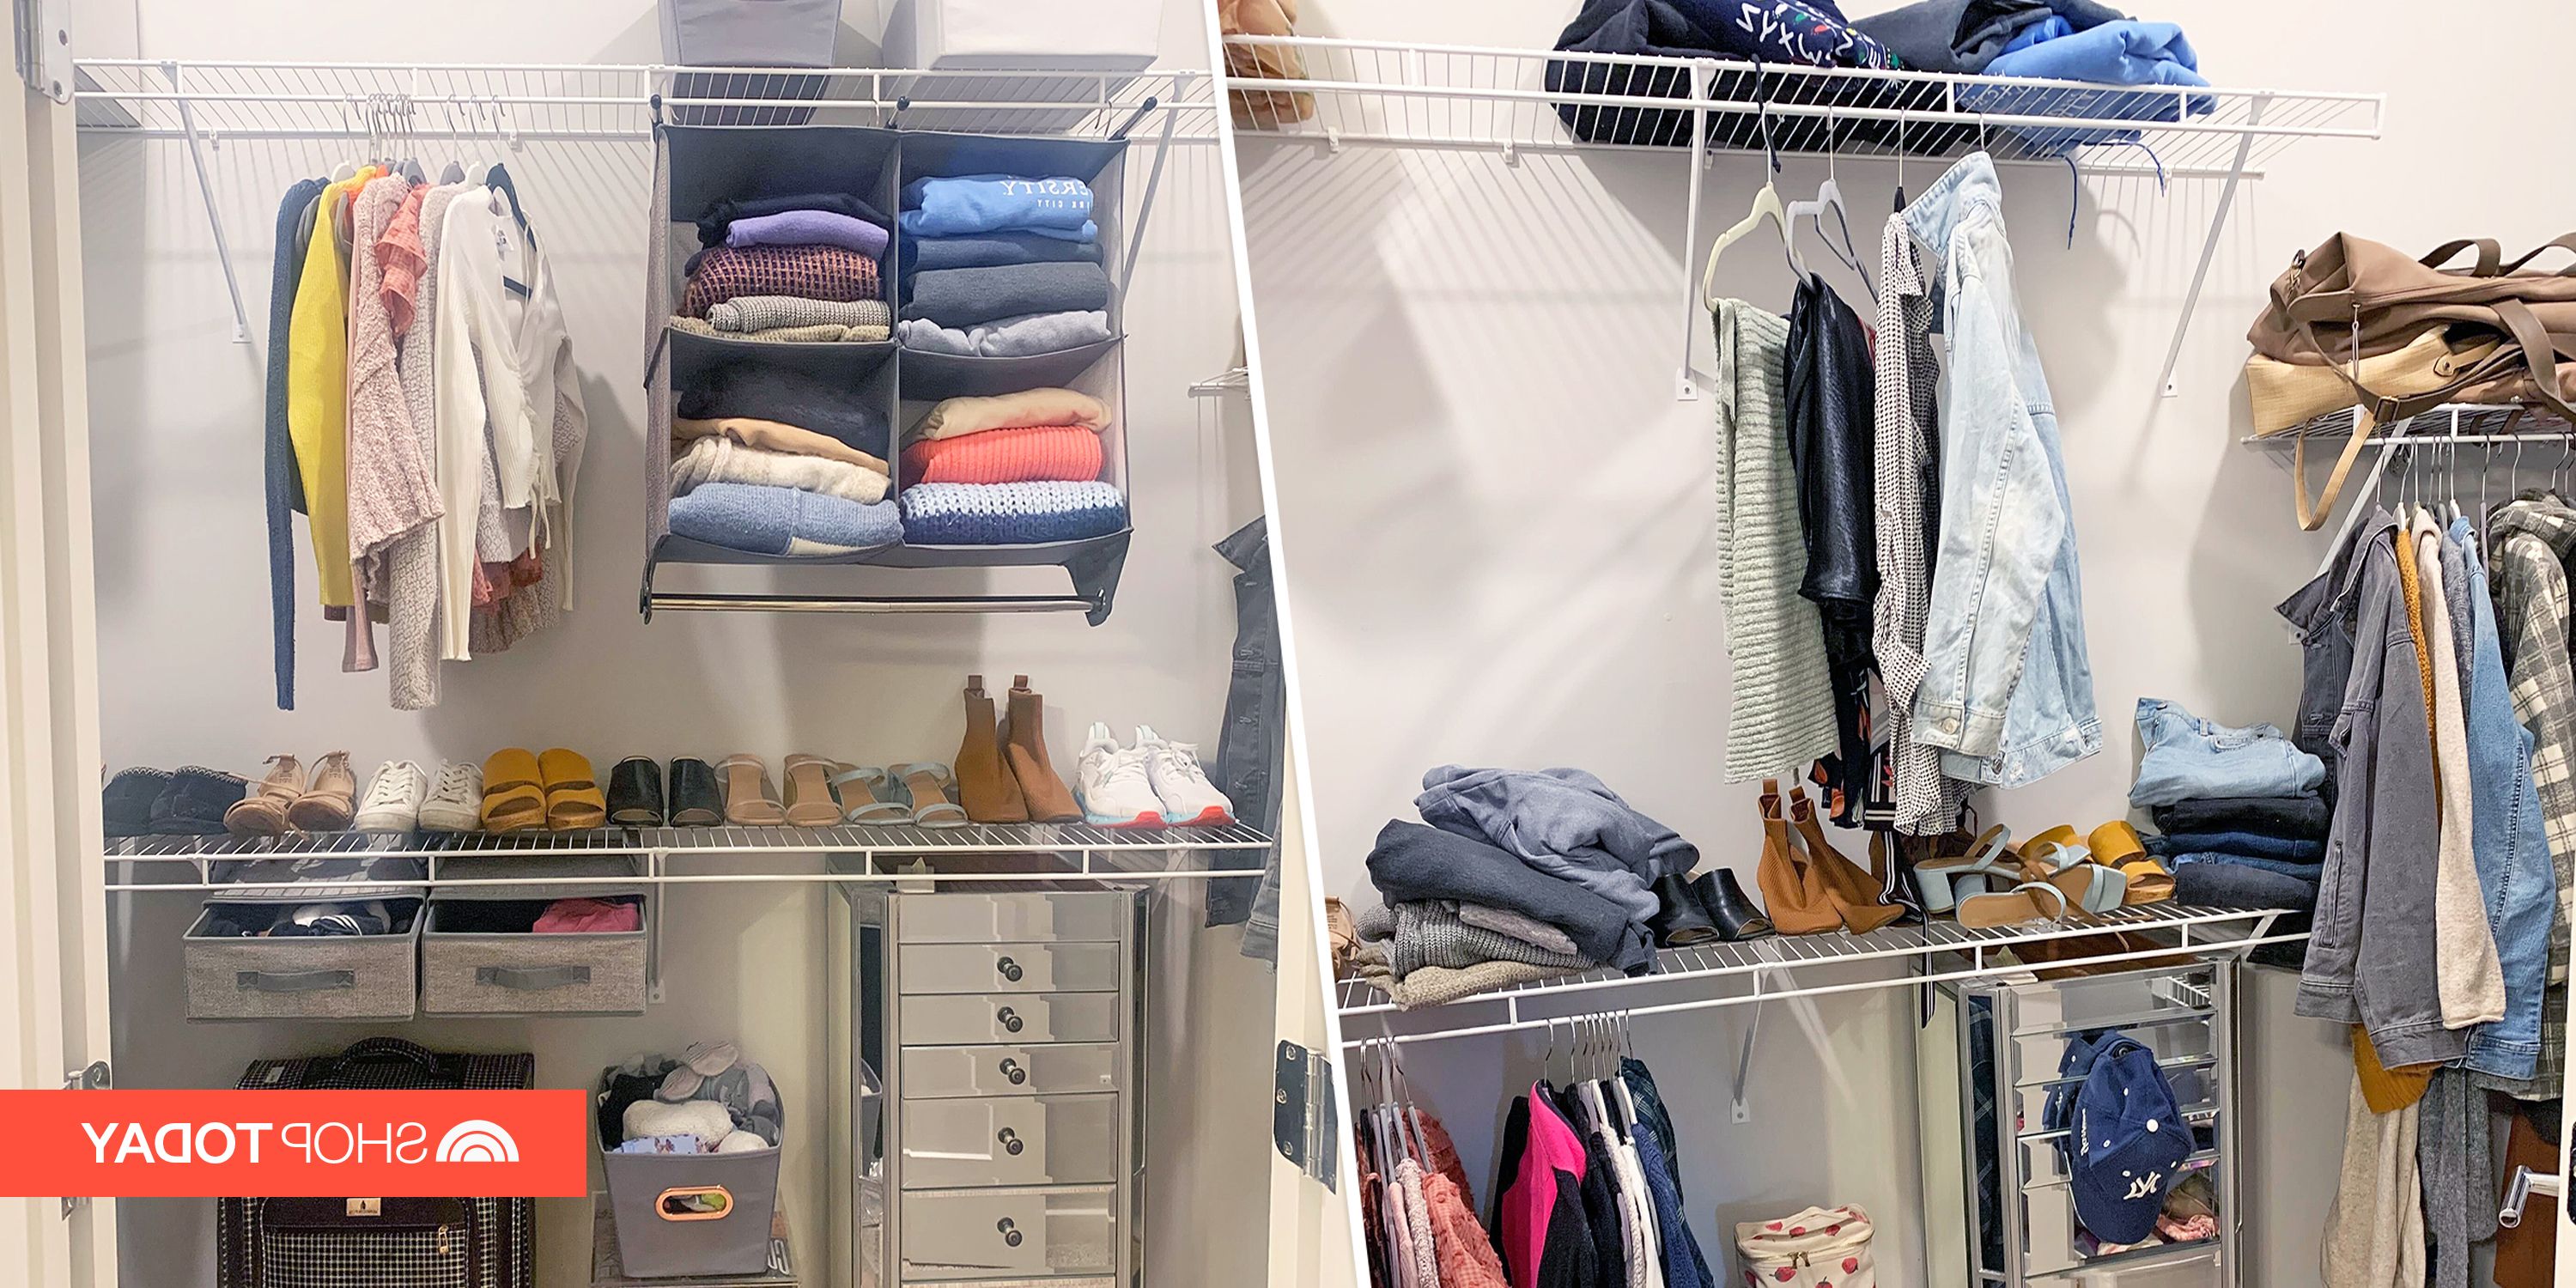 These Closet Organizers Clear Clutter And Maximize My Space Pertaining To Clothes Organizer Wardrobes (View 6 of 20)